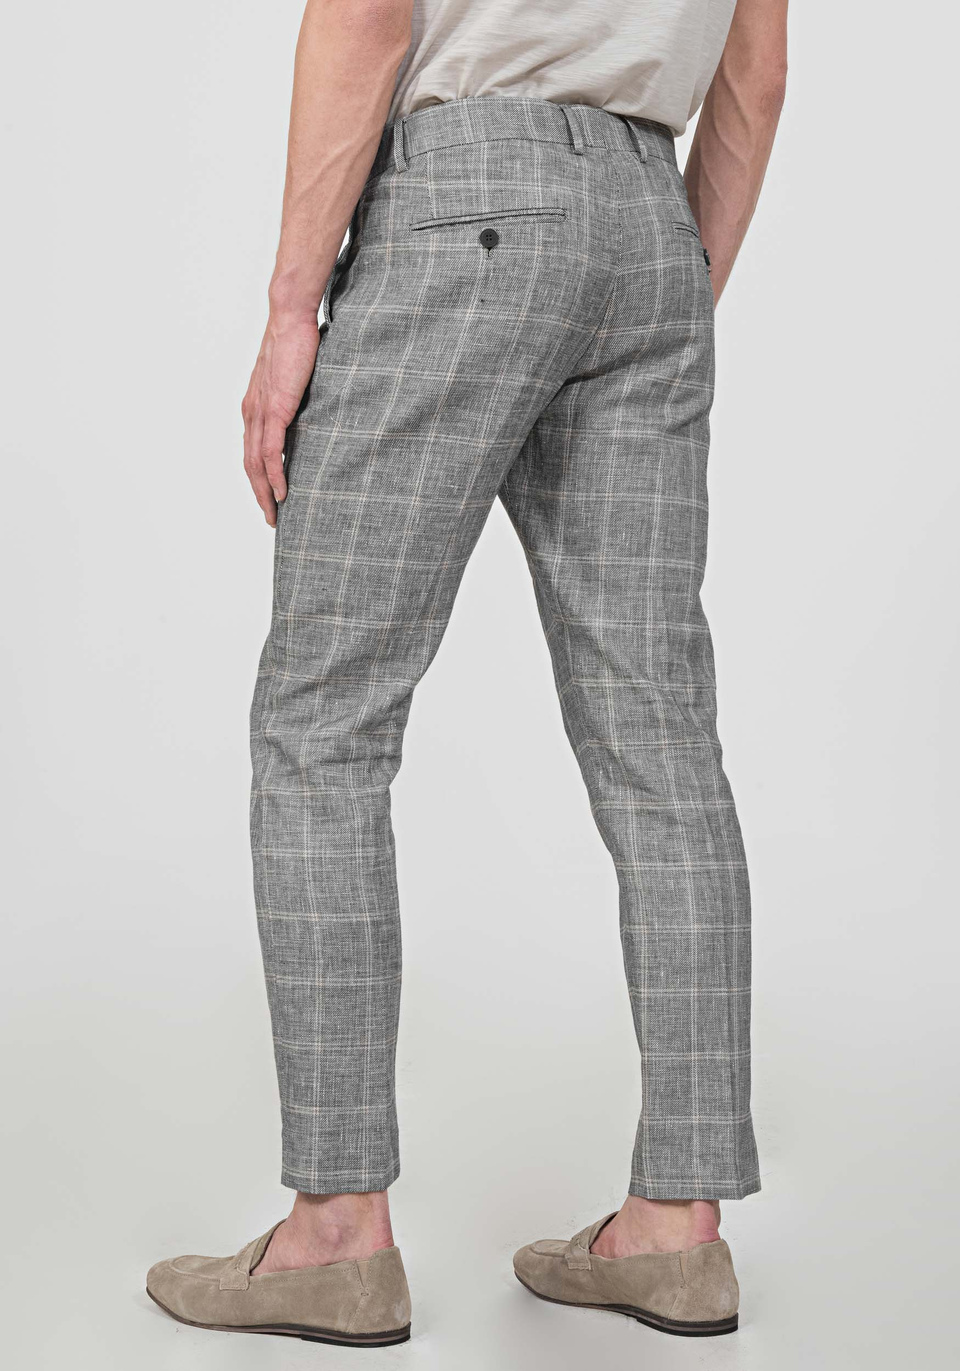 SLIM-FIT ANKLE-LENGTH “ANIKA” TROUSERS IN A LINEN BLEND - Antony Morato Online Shop